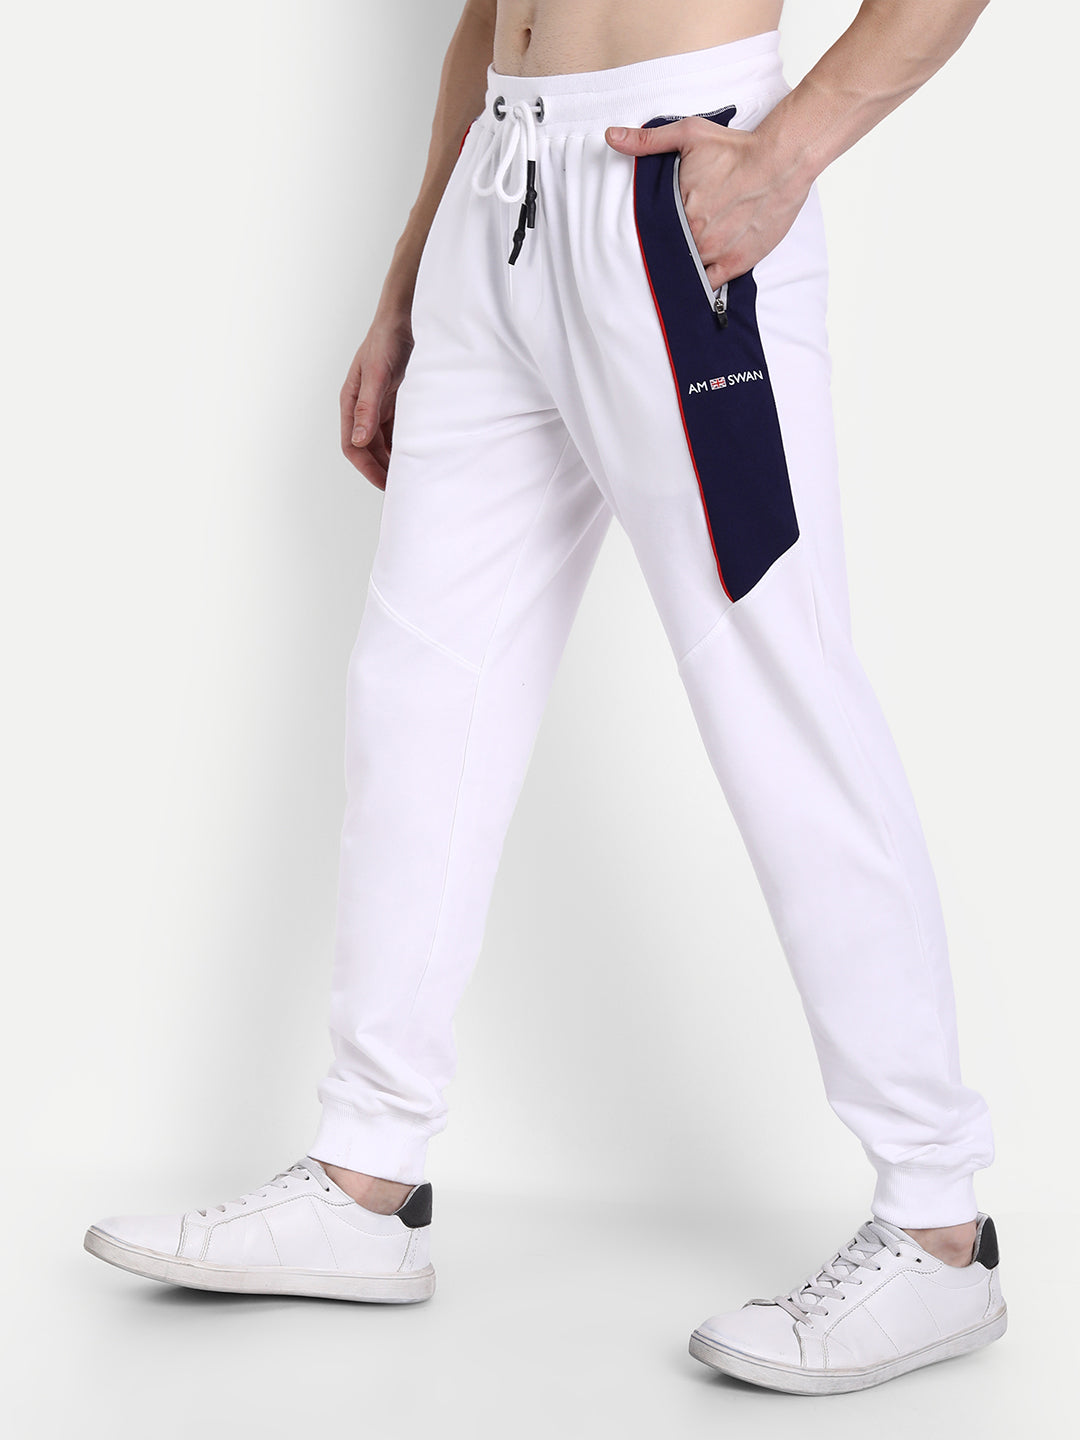 MENS COTTON RICH LYCRA WITH CONTRAST PANNEL PRINTED TRACK PANTS